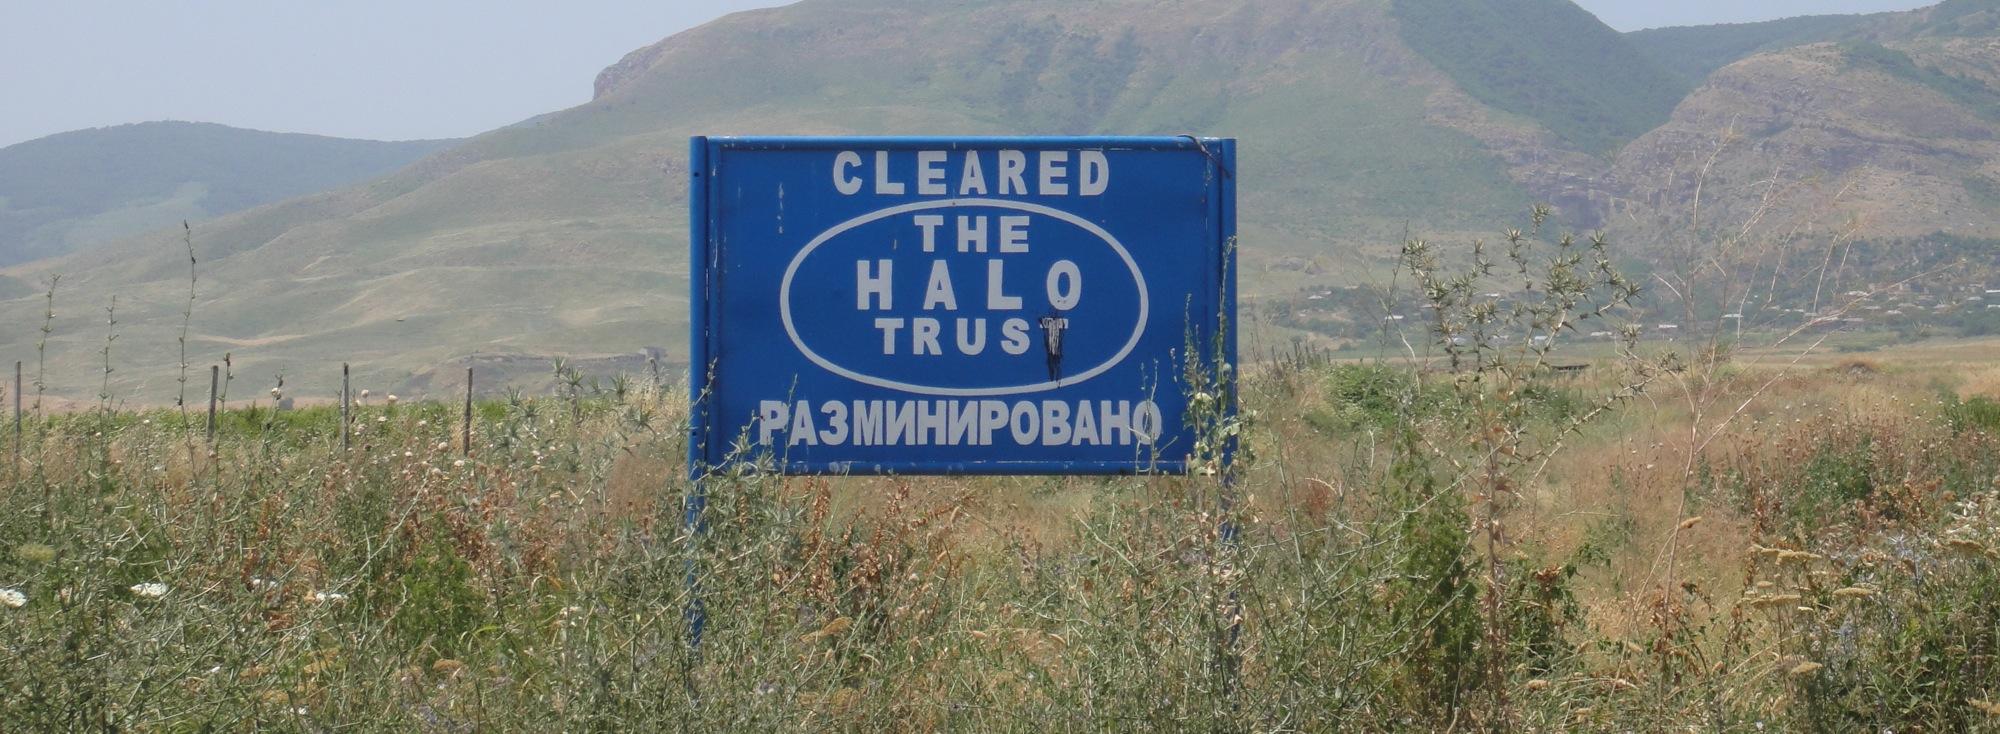 HALO Trust employees killed in an explosion in Nagorno-Karabakh